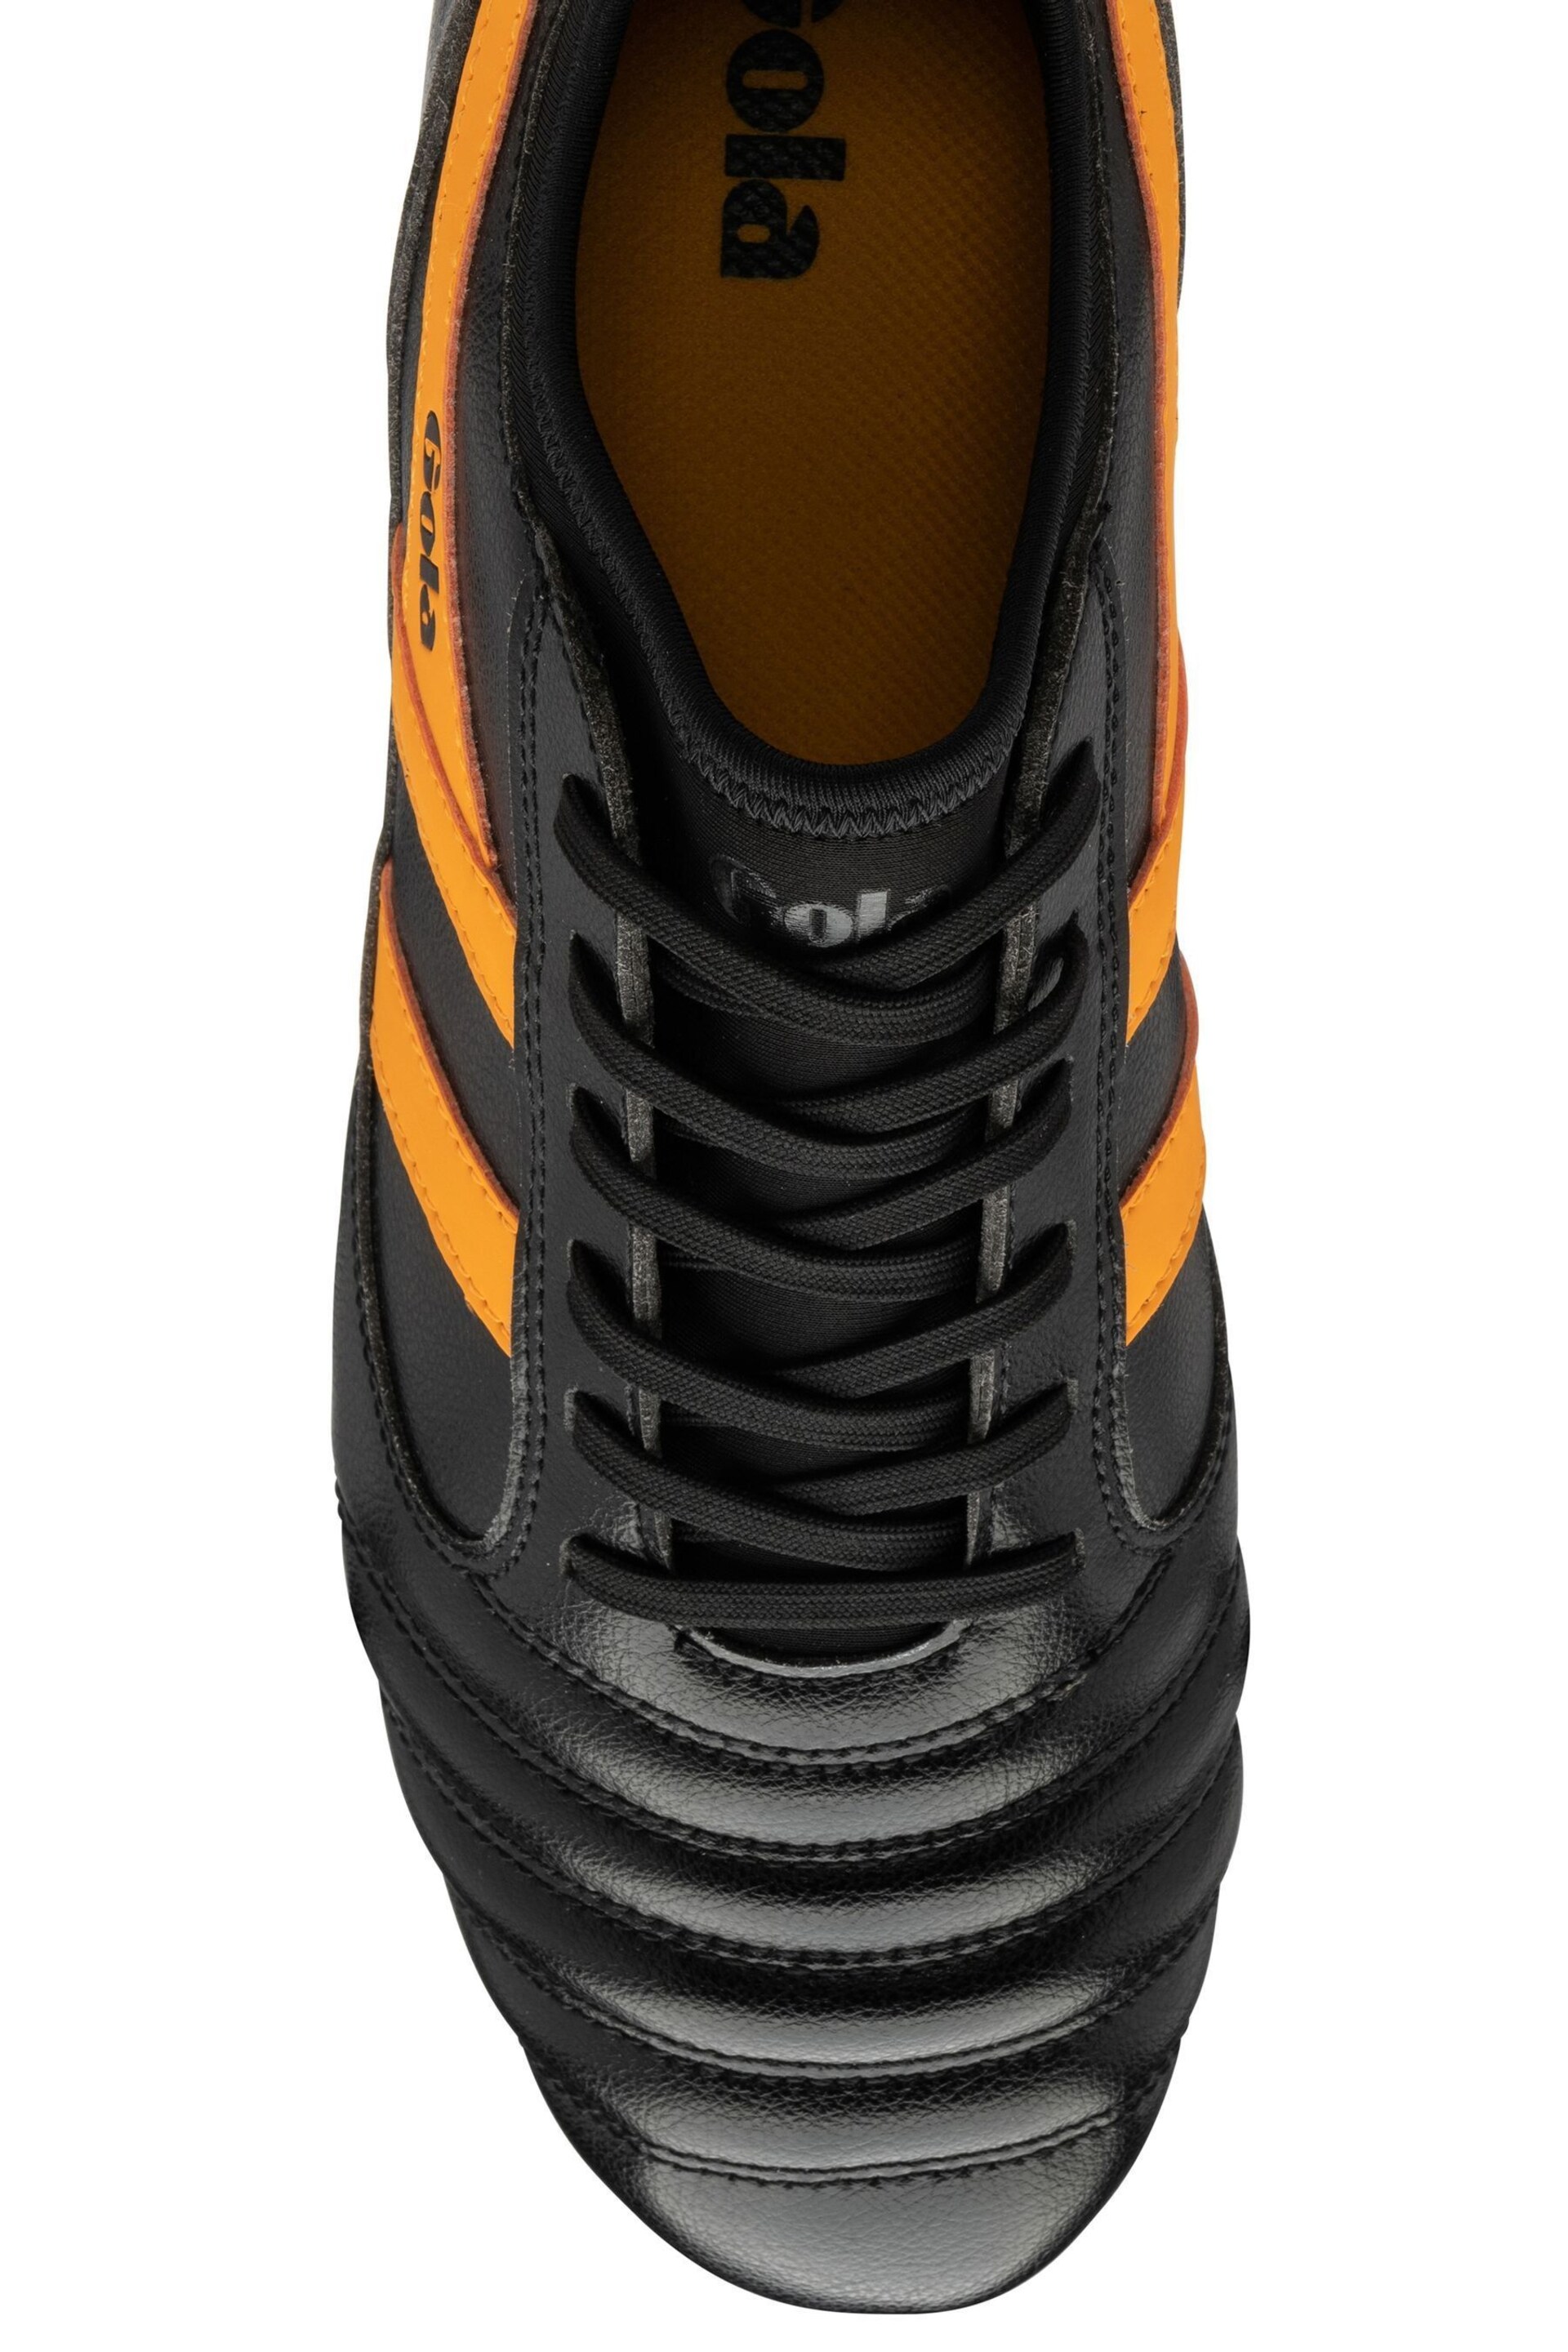 Gola Black Mens Ceptor MLD Pro Microfibre Lace-Up Football Boots - Image 5 of 5